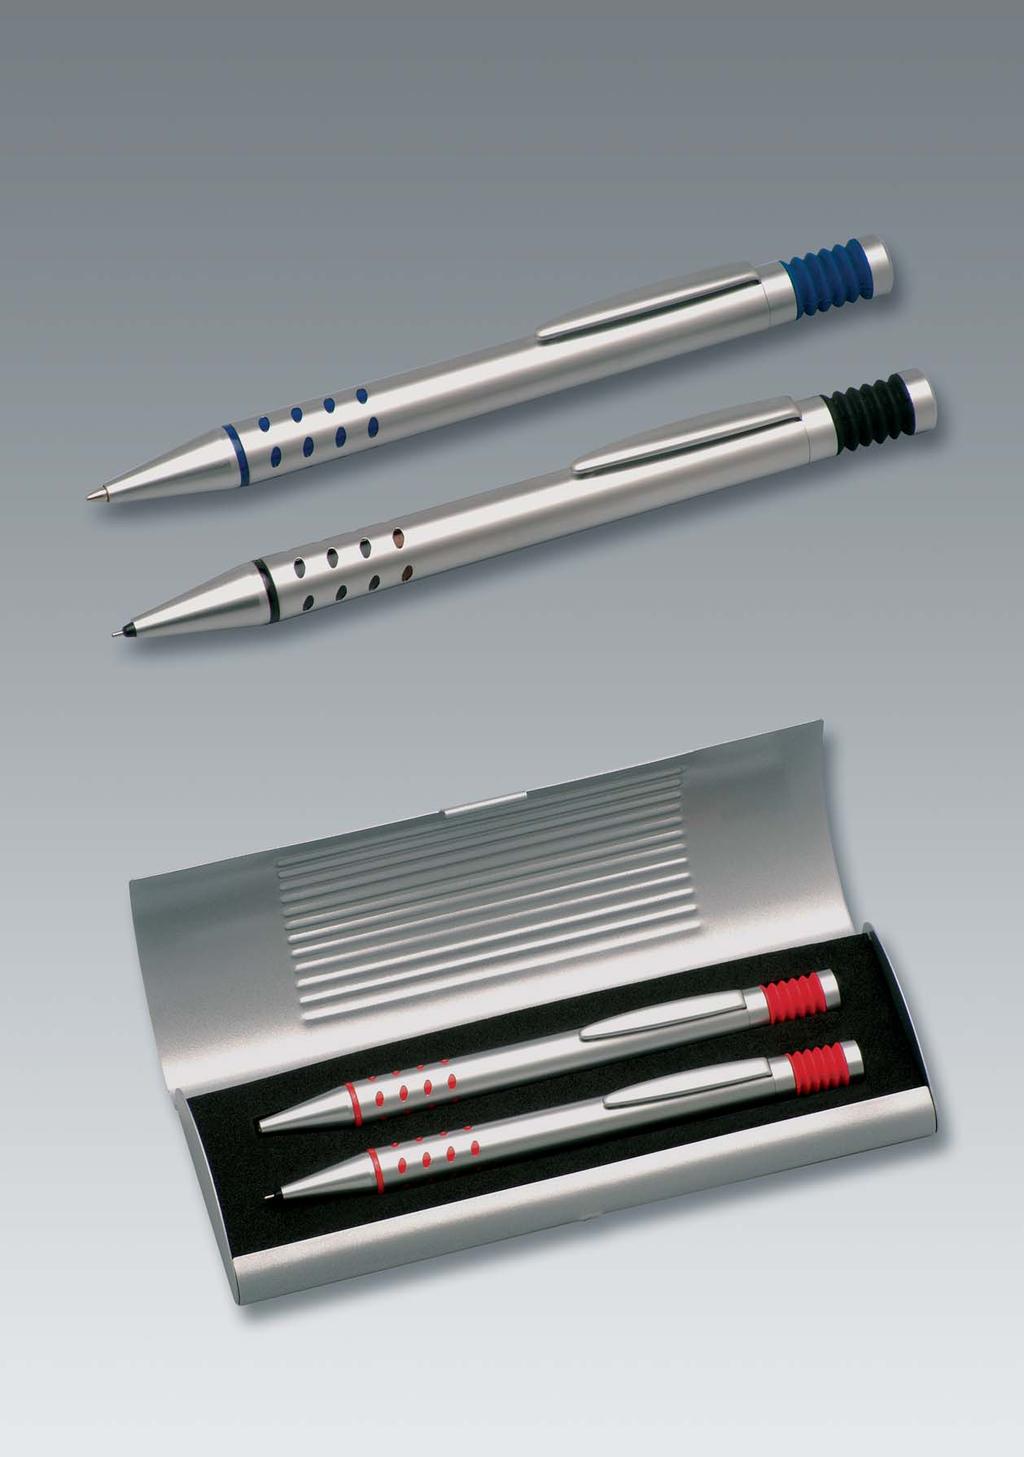 Metal pens Article 260/KS: metal ball pen, chromed barrel Applications and pusher in black, red and blue Int.